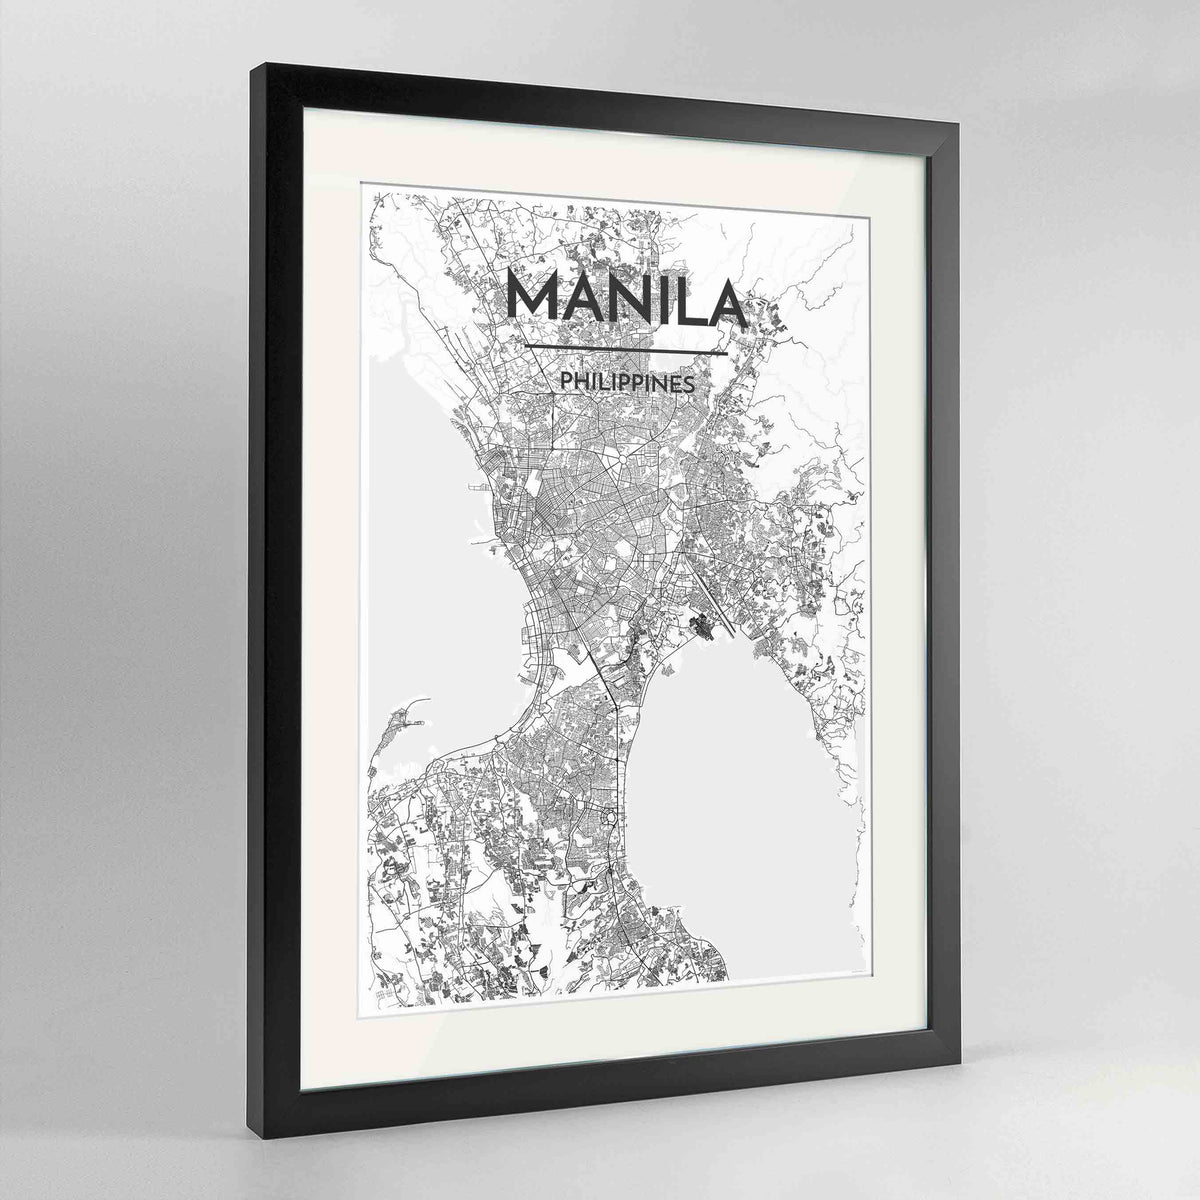 Framed Manila Map Art Print 24x36&quot; Contemporary Black frame Point Two Design Group